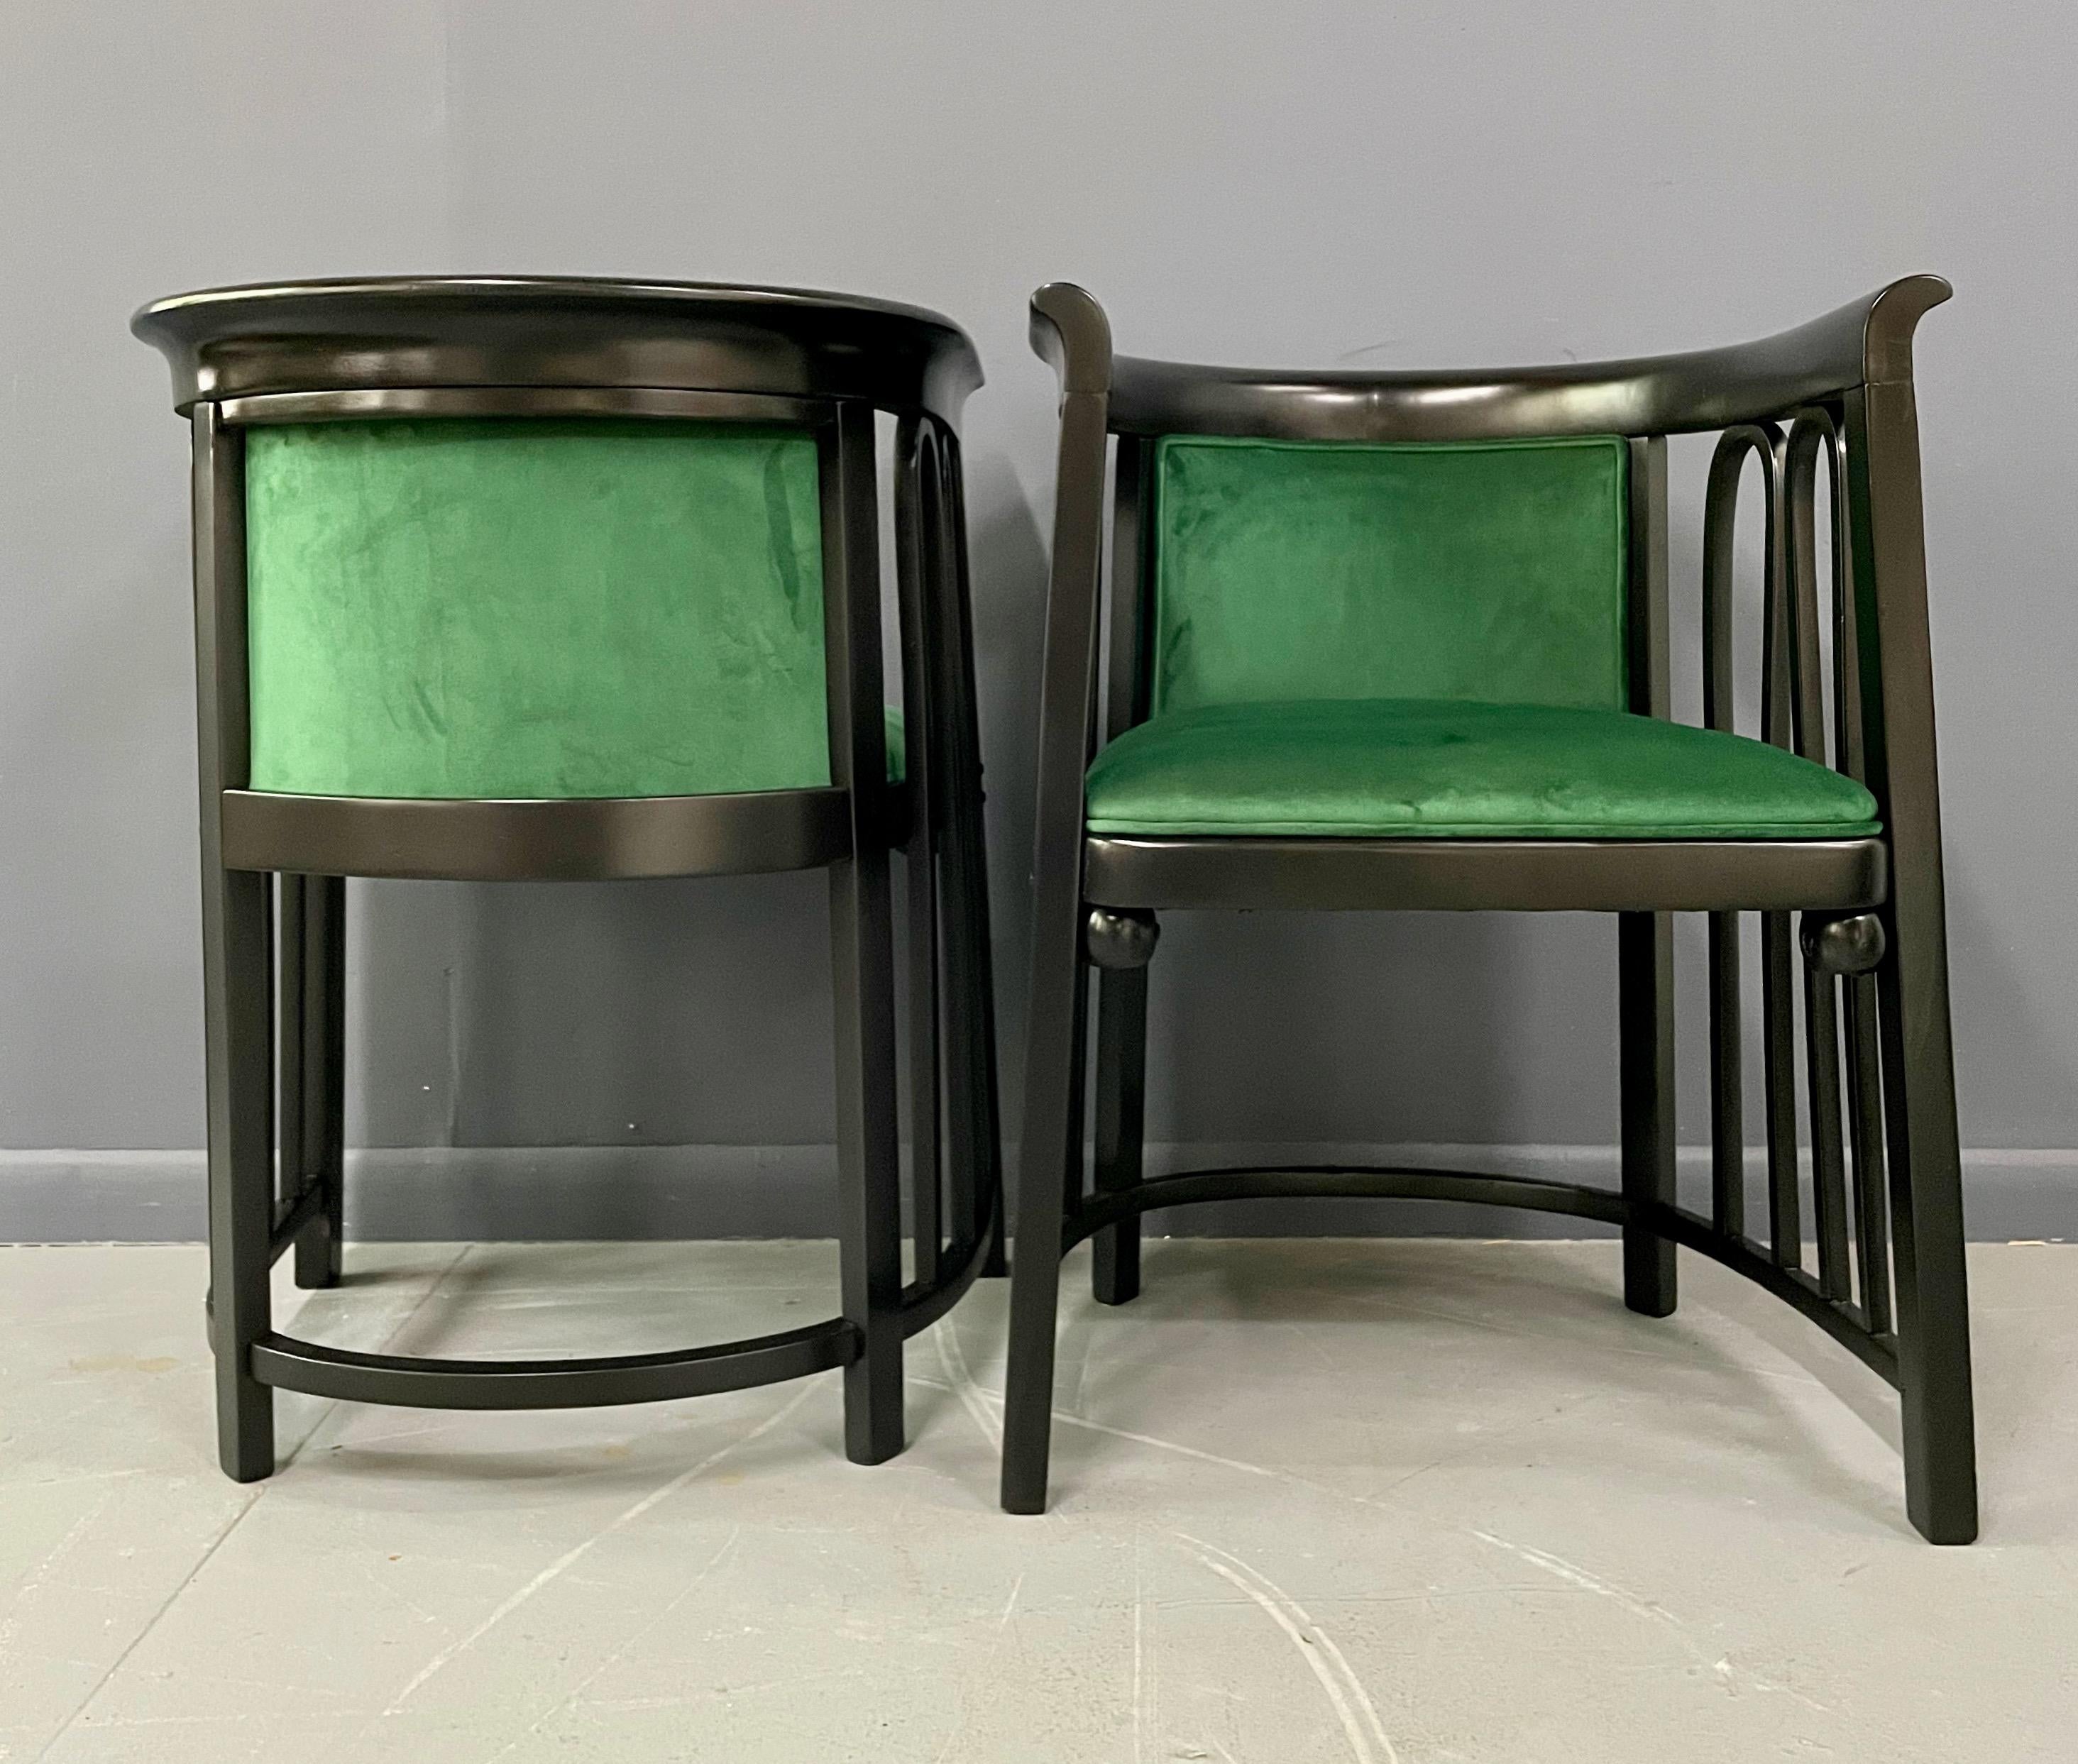 These lounge chairs from the early 1900s have an unusual bentwood design that makes them extremely rare. They have been totally refinished and reupholstered.